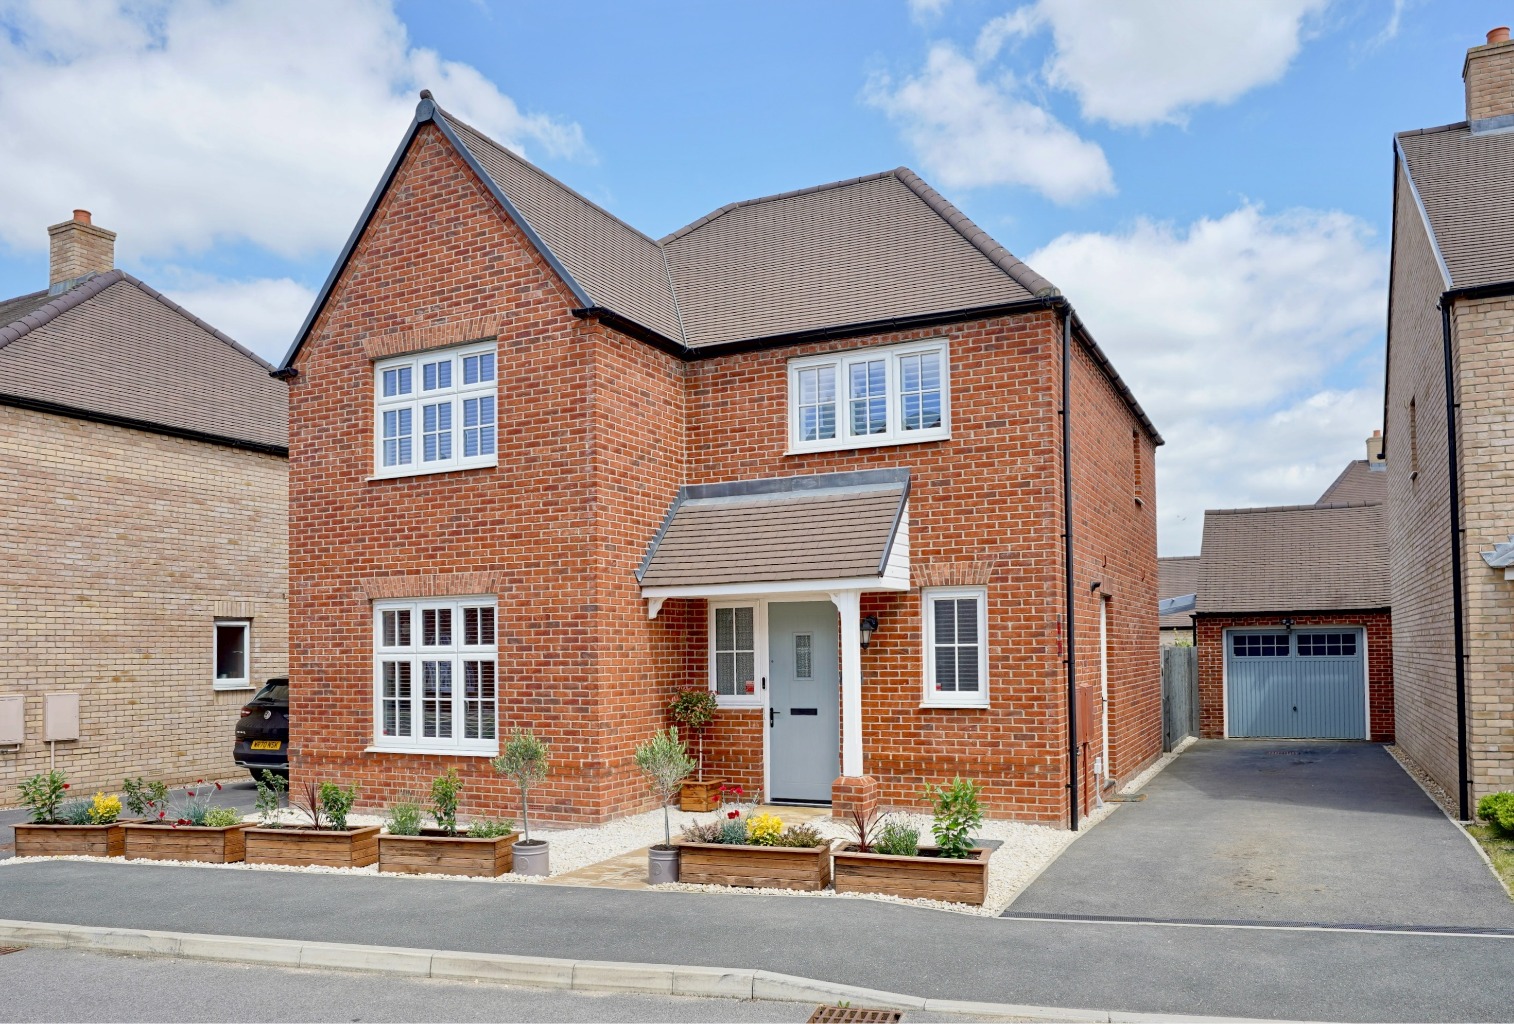 4 bed detached house for sale in Bardolph Way, Huntingdon - Property Image 1